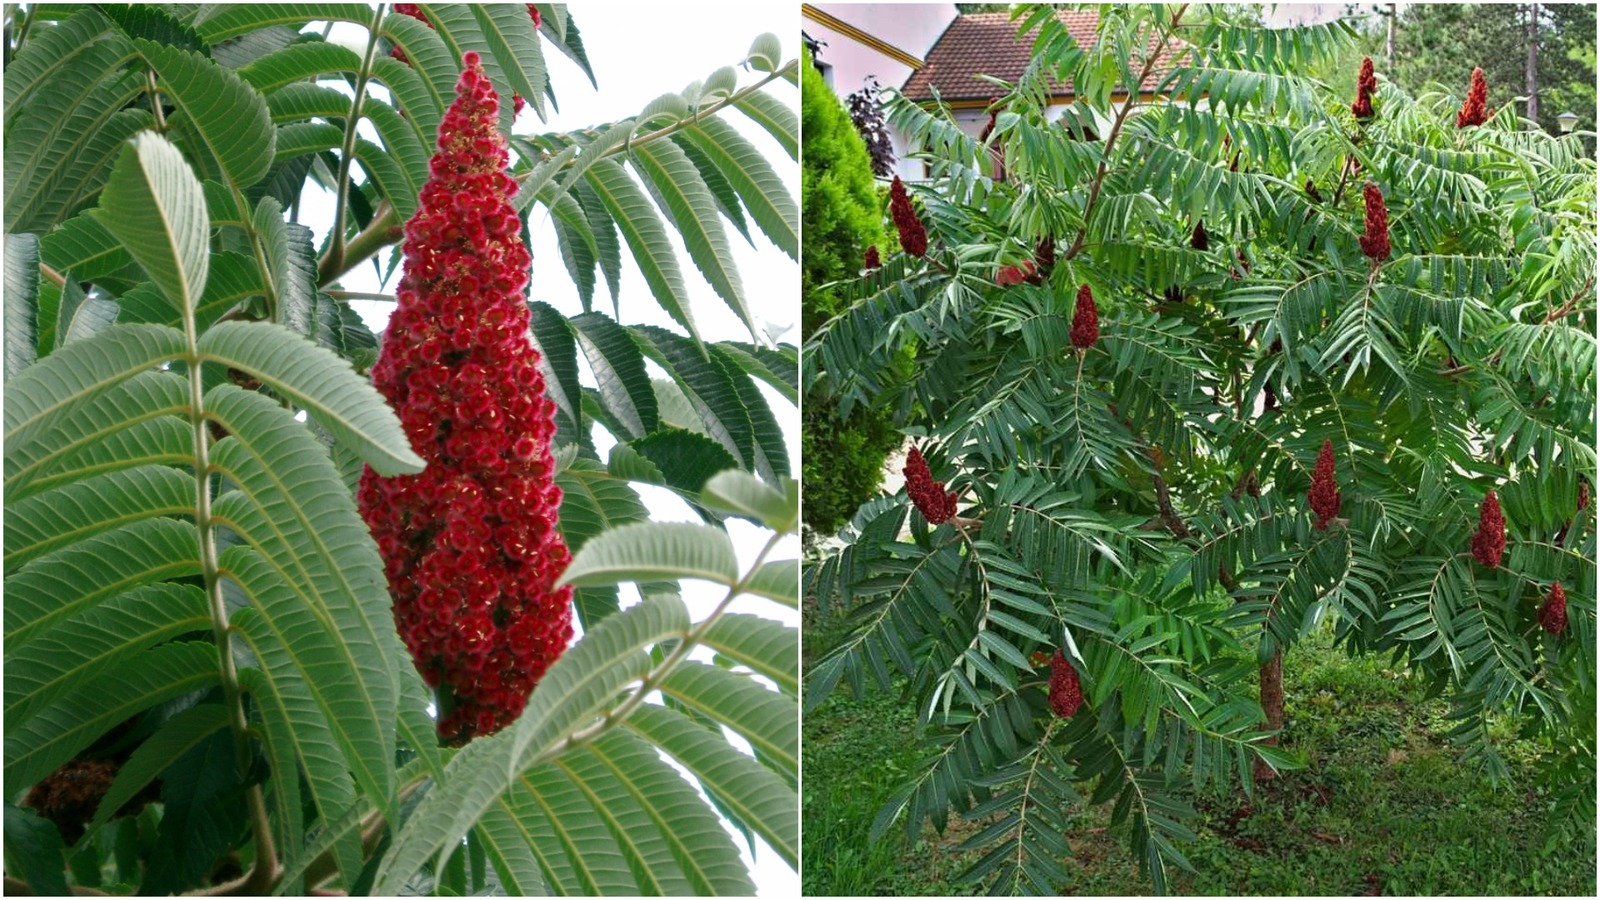 Live Plant Staghorn Sumac Shrub Or Small Tree Live 1 Plant In 1 Gallon Pot Plants And Seedlings